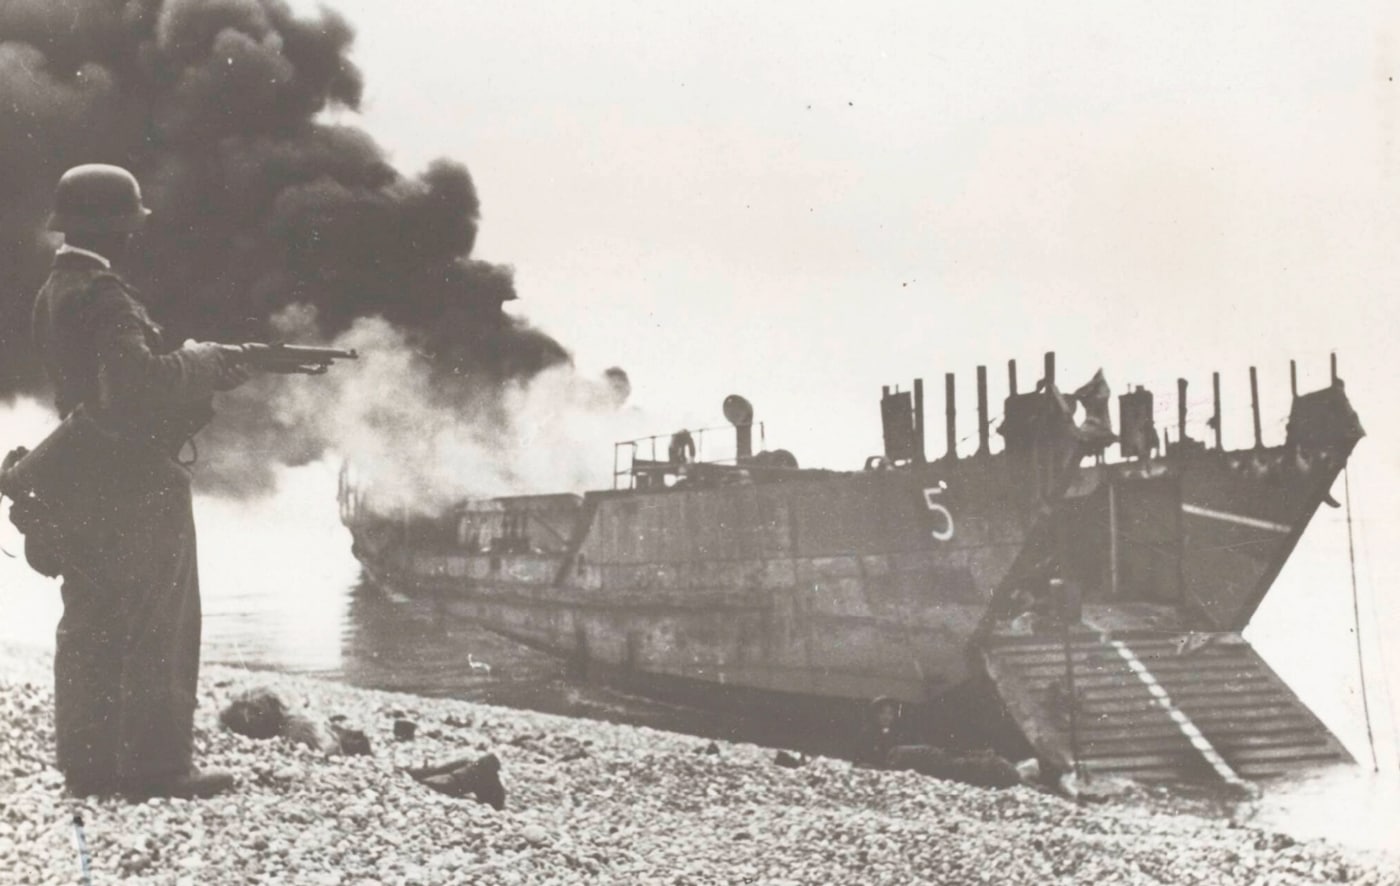 In this black and white photo from the Dieppe Raid, a German soldier with Kar 98k rifle stands in front of a burning British landing craft.